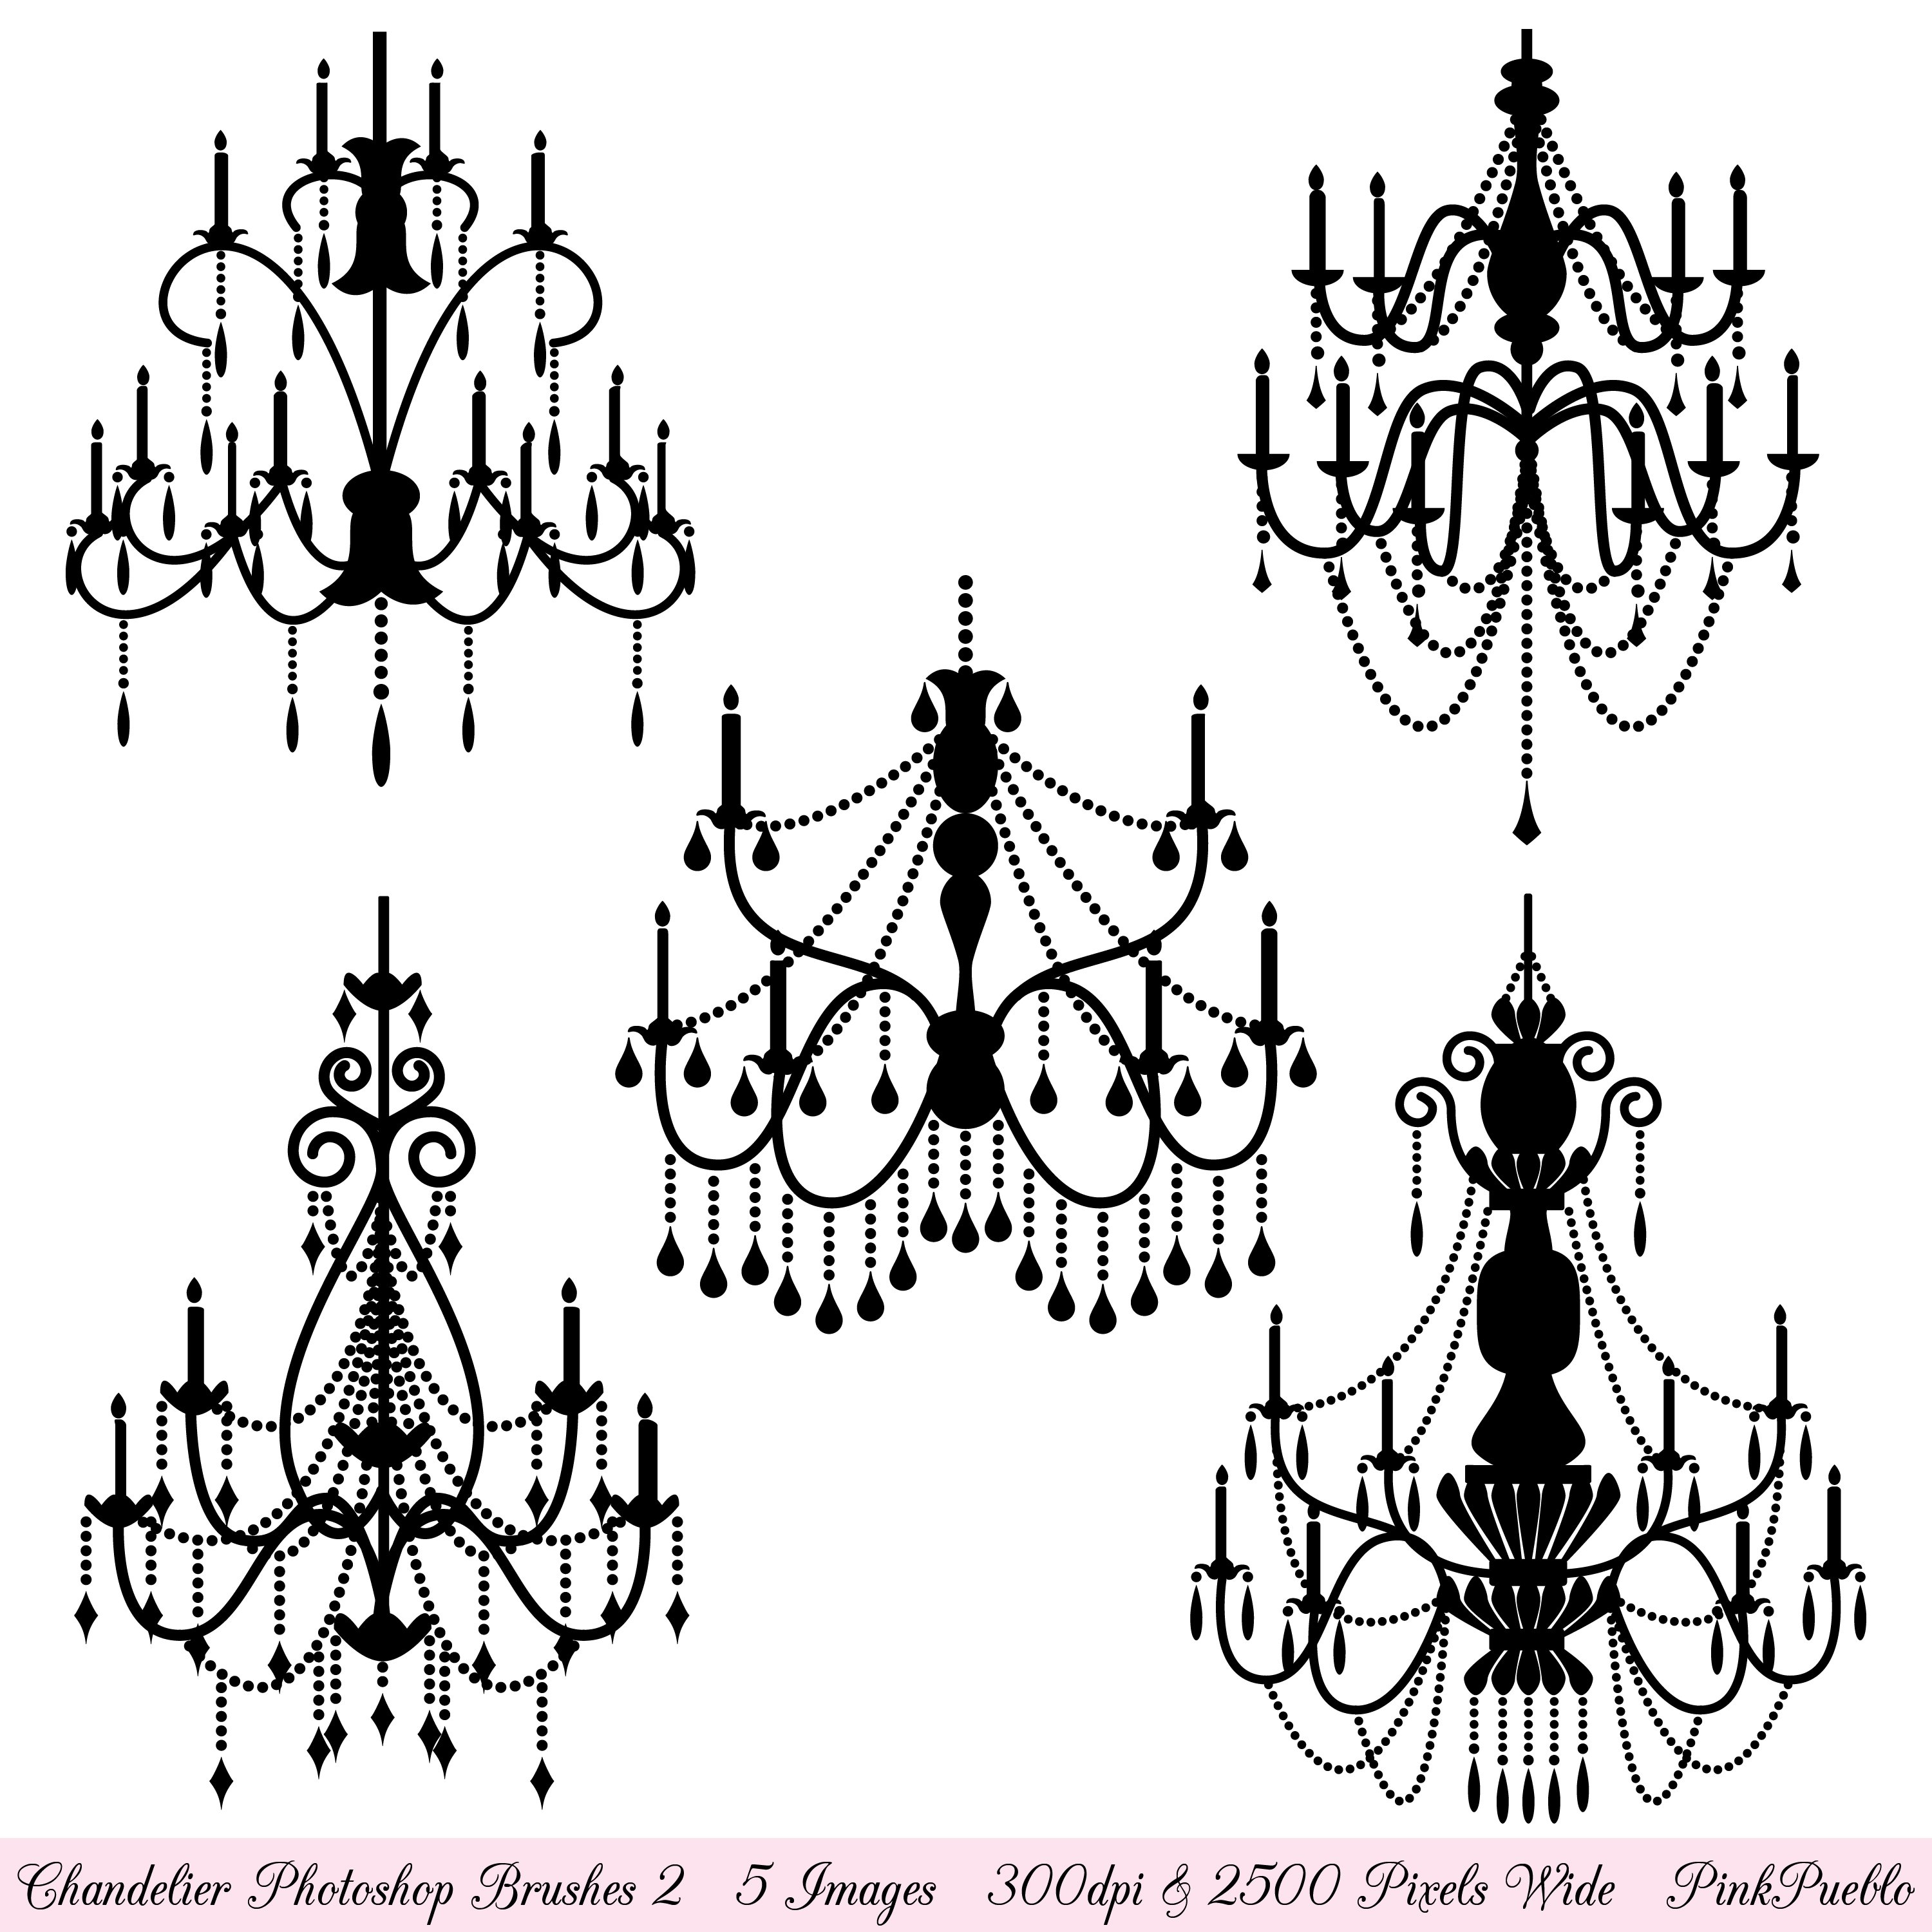 Chandelier Photoshop Brushes 2preview image.